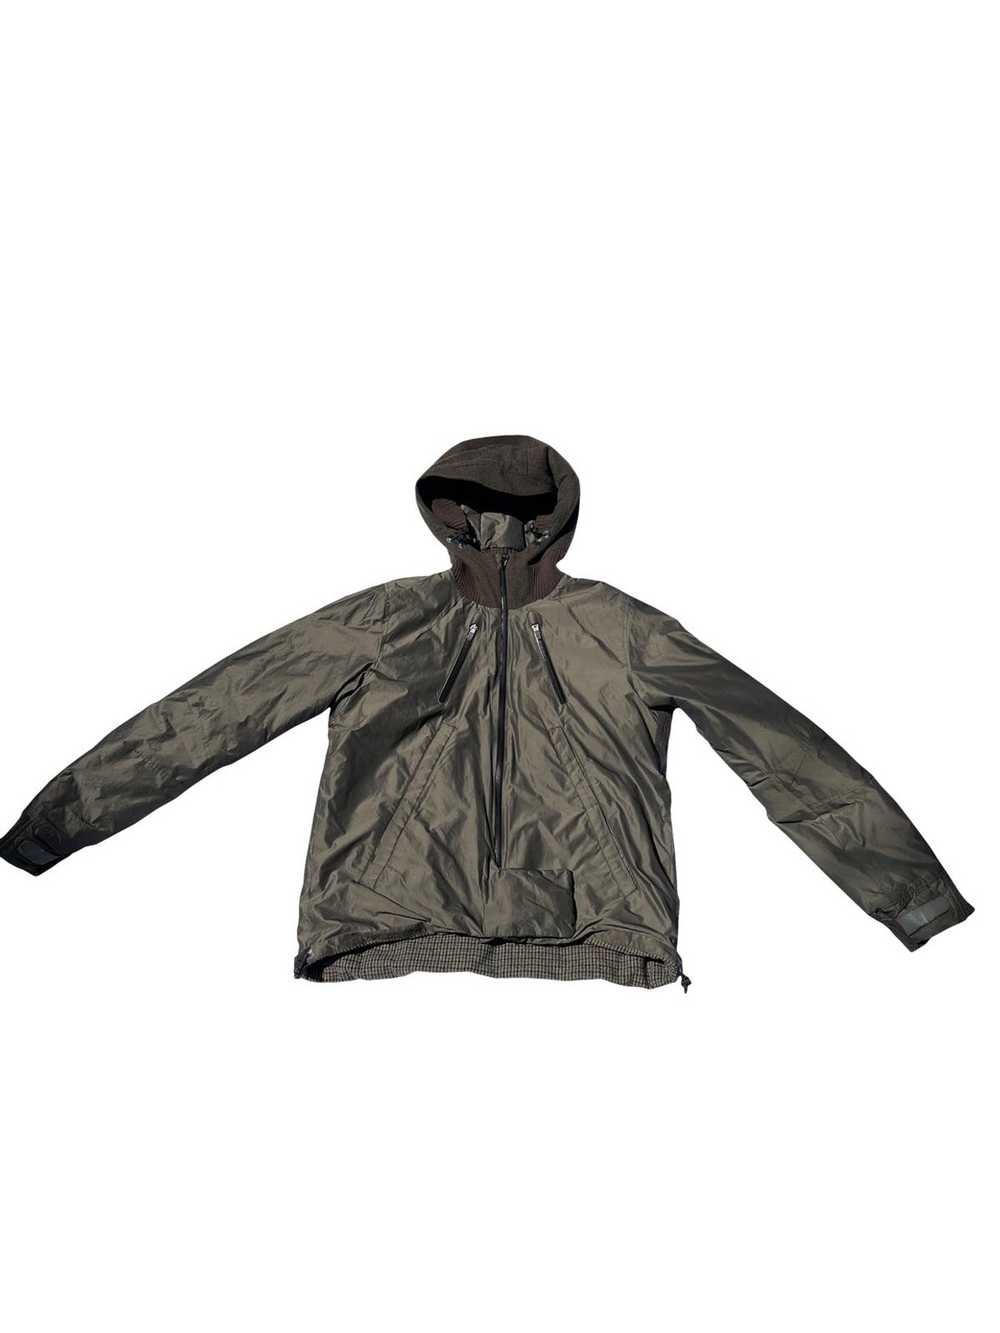 Undercover Undercover Knit Tech/Puffer Jacket 07 - image 2